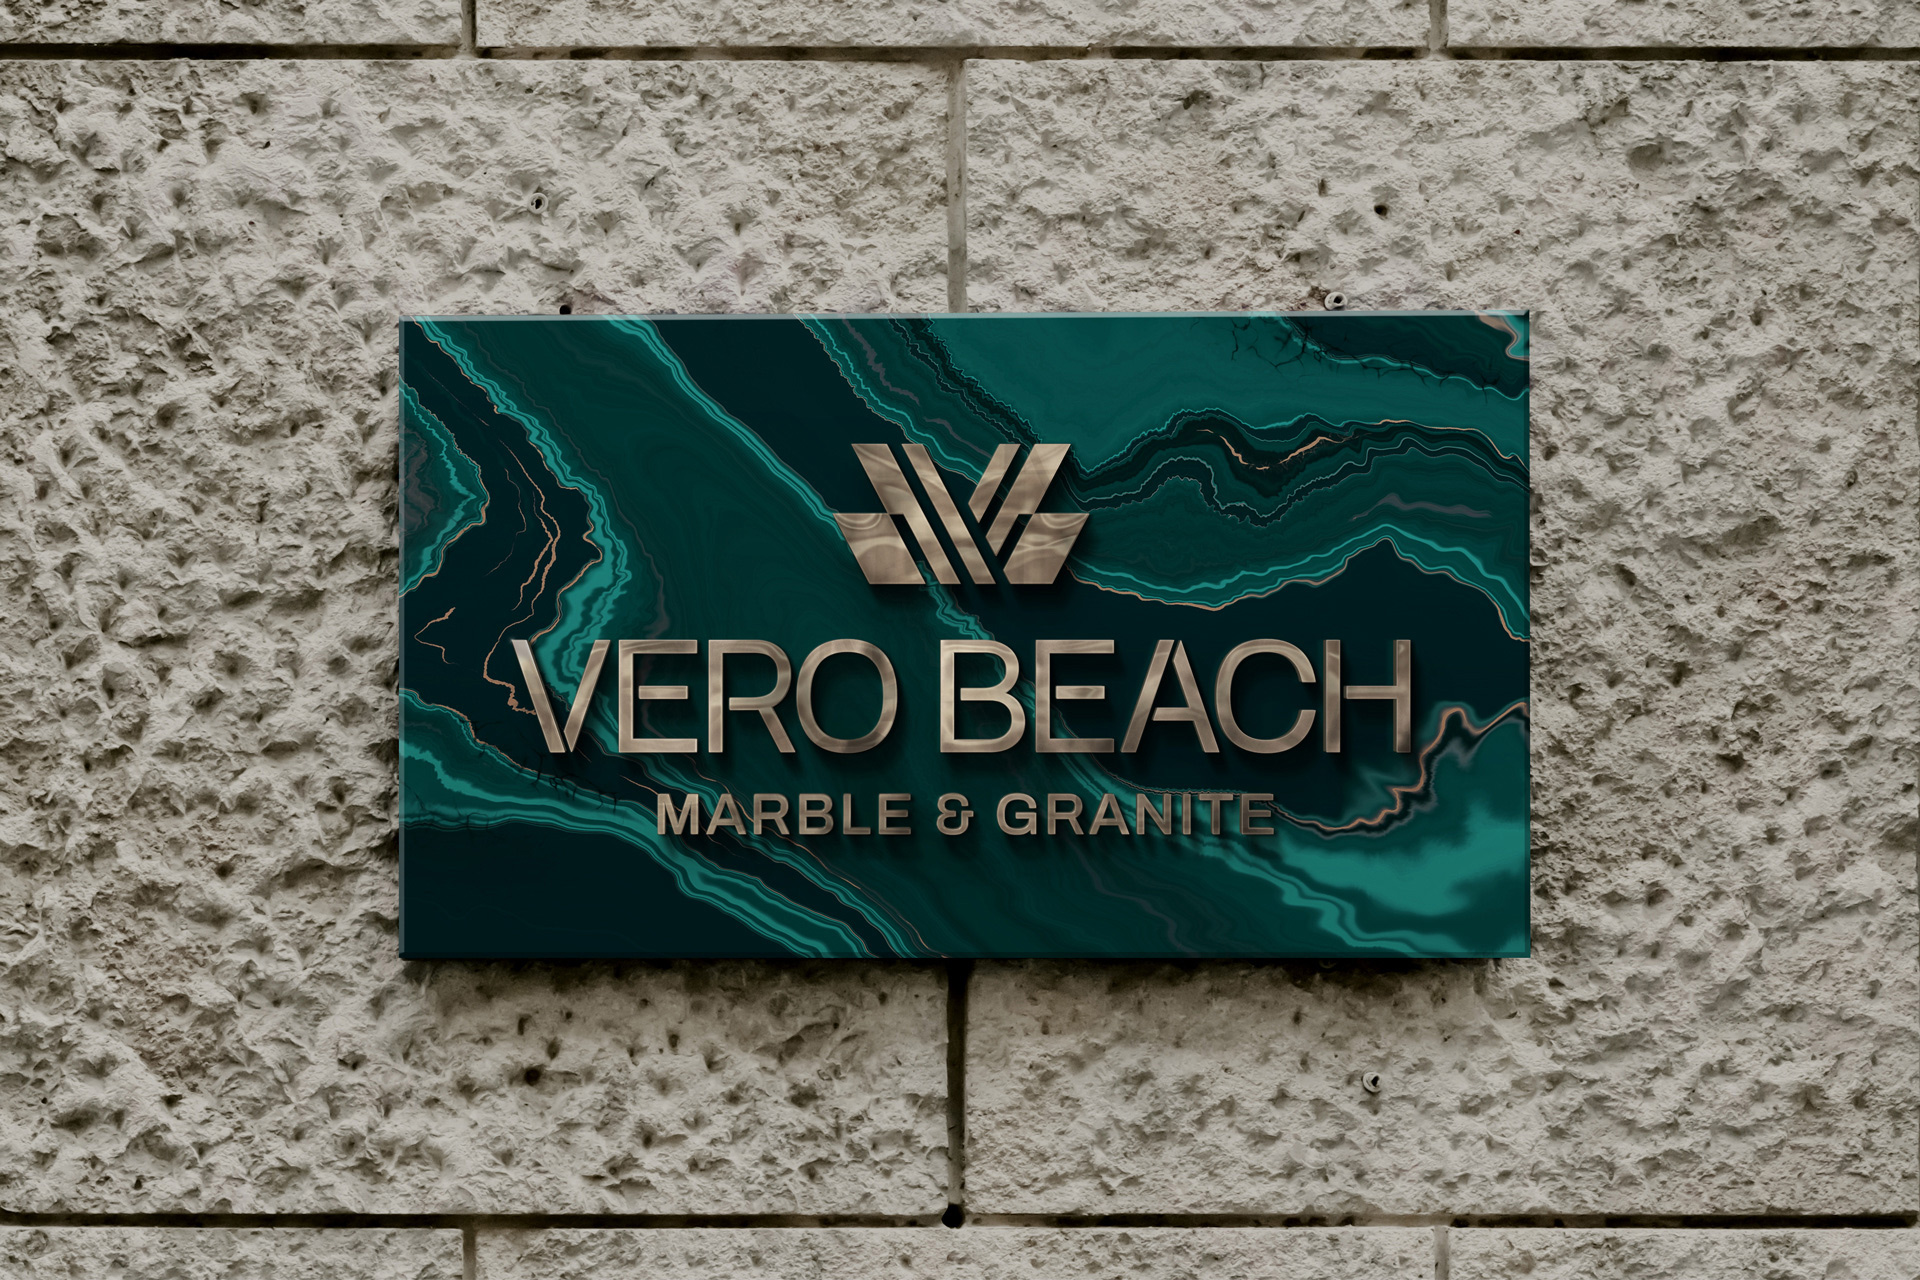 An Elegant Brand for a Marble and Granite Company by Lucas Coradi